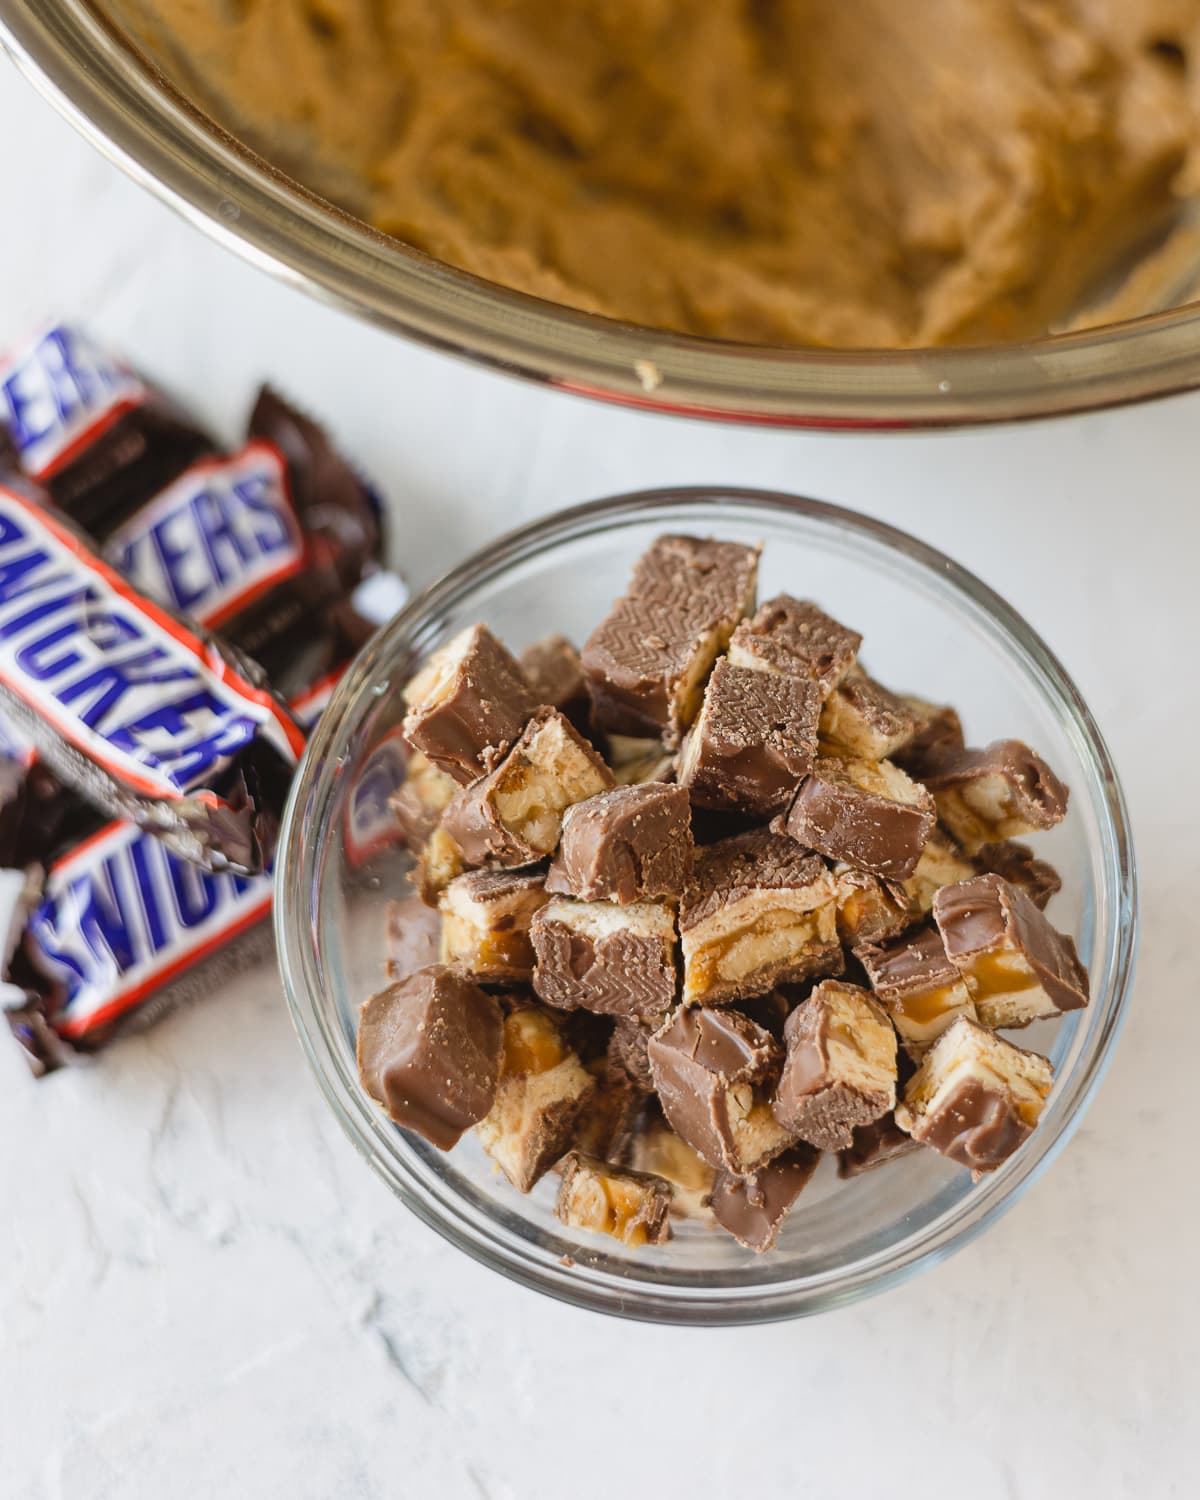 A small bowl of chopped Snickers candy bars.